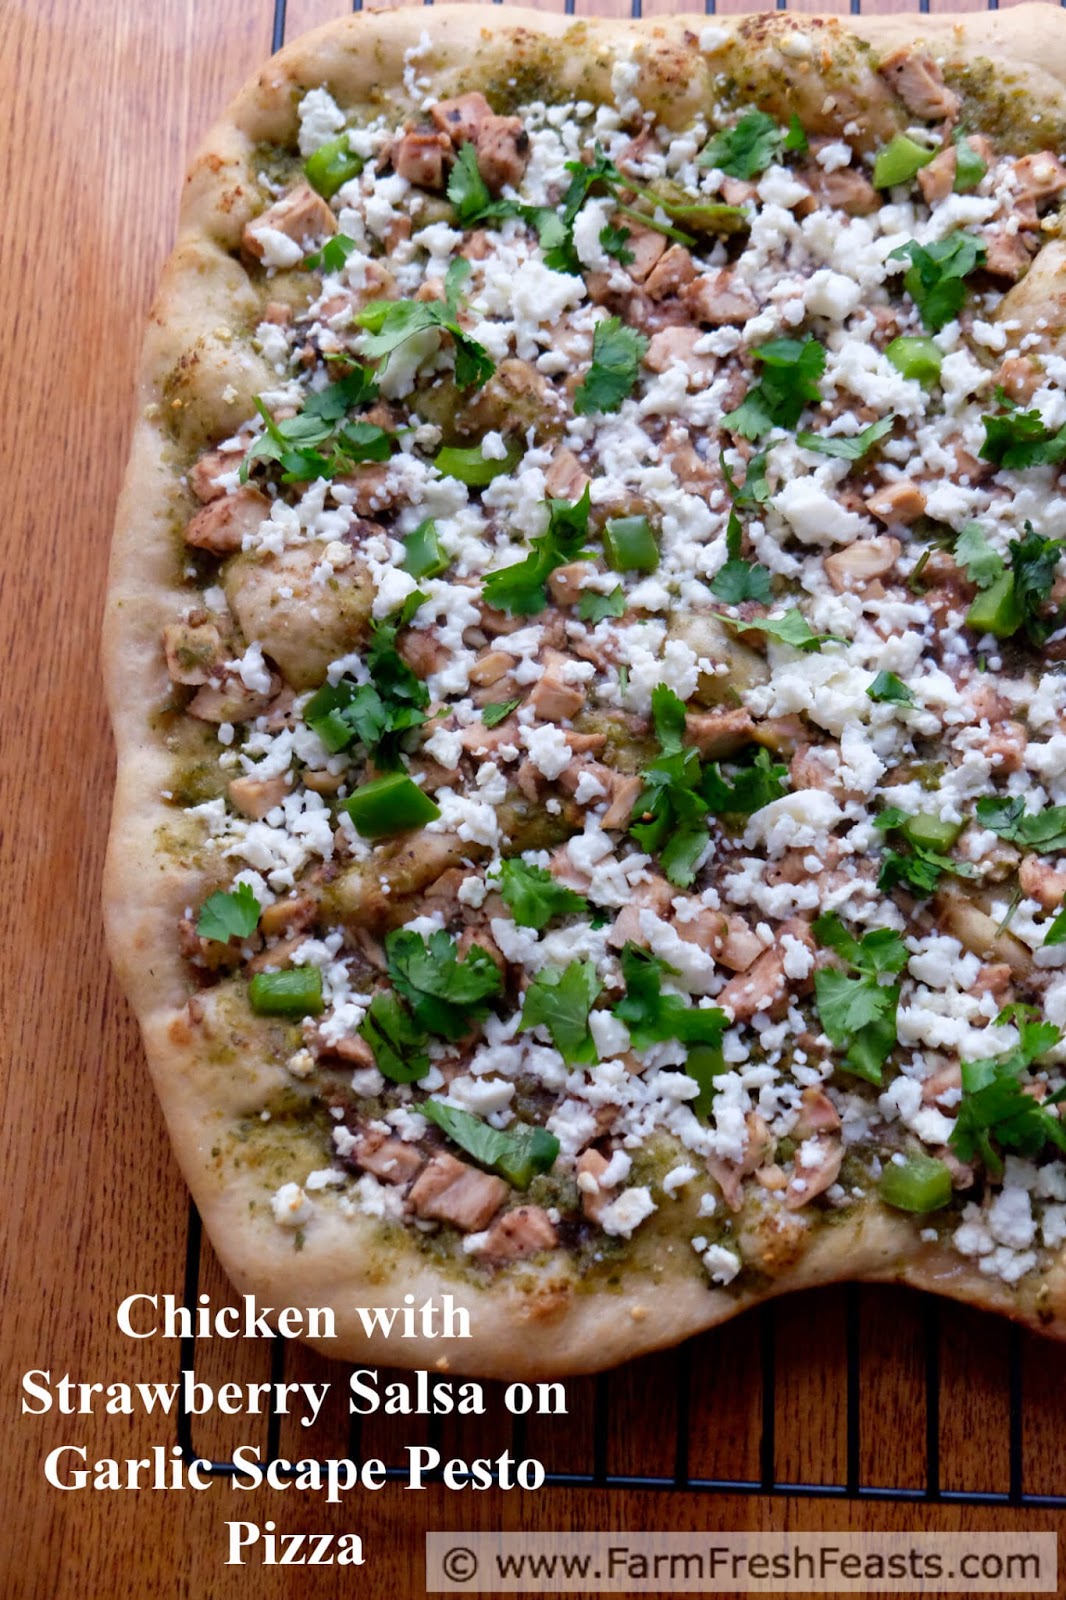 http://www.farmfreshfeasts.com/2015/05/chicken-pizza-with-strawberry-salsa-and.html